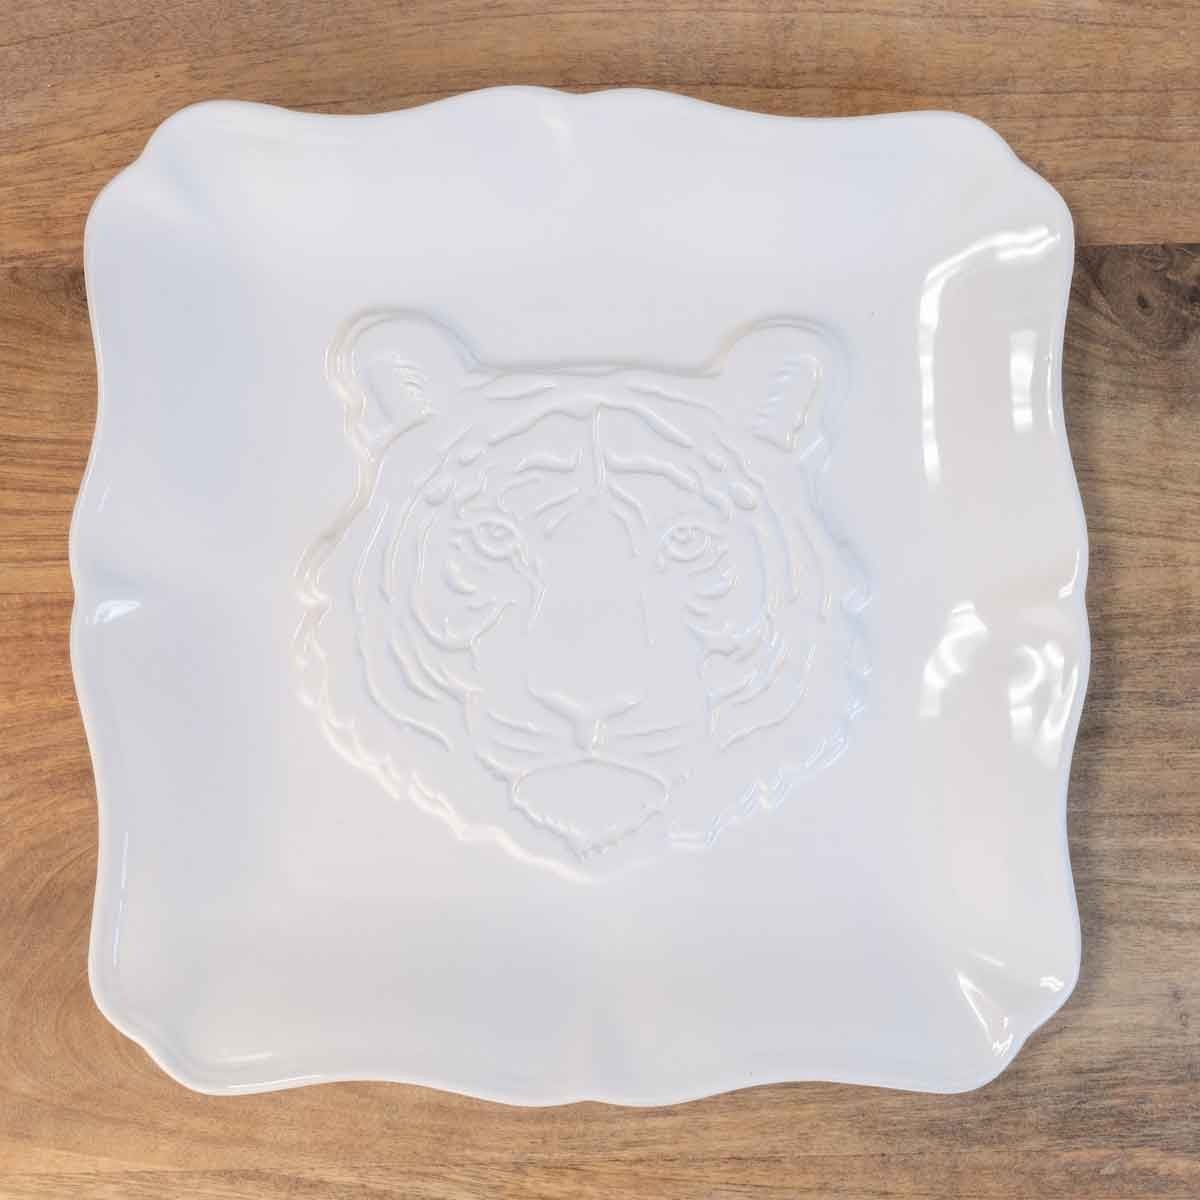 Load image into Gallery viewer, Tiger Square Platter   White   11.5x11.5
